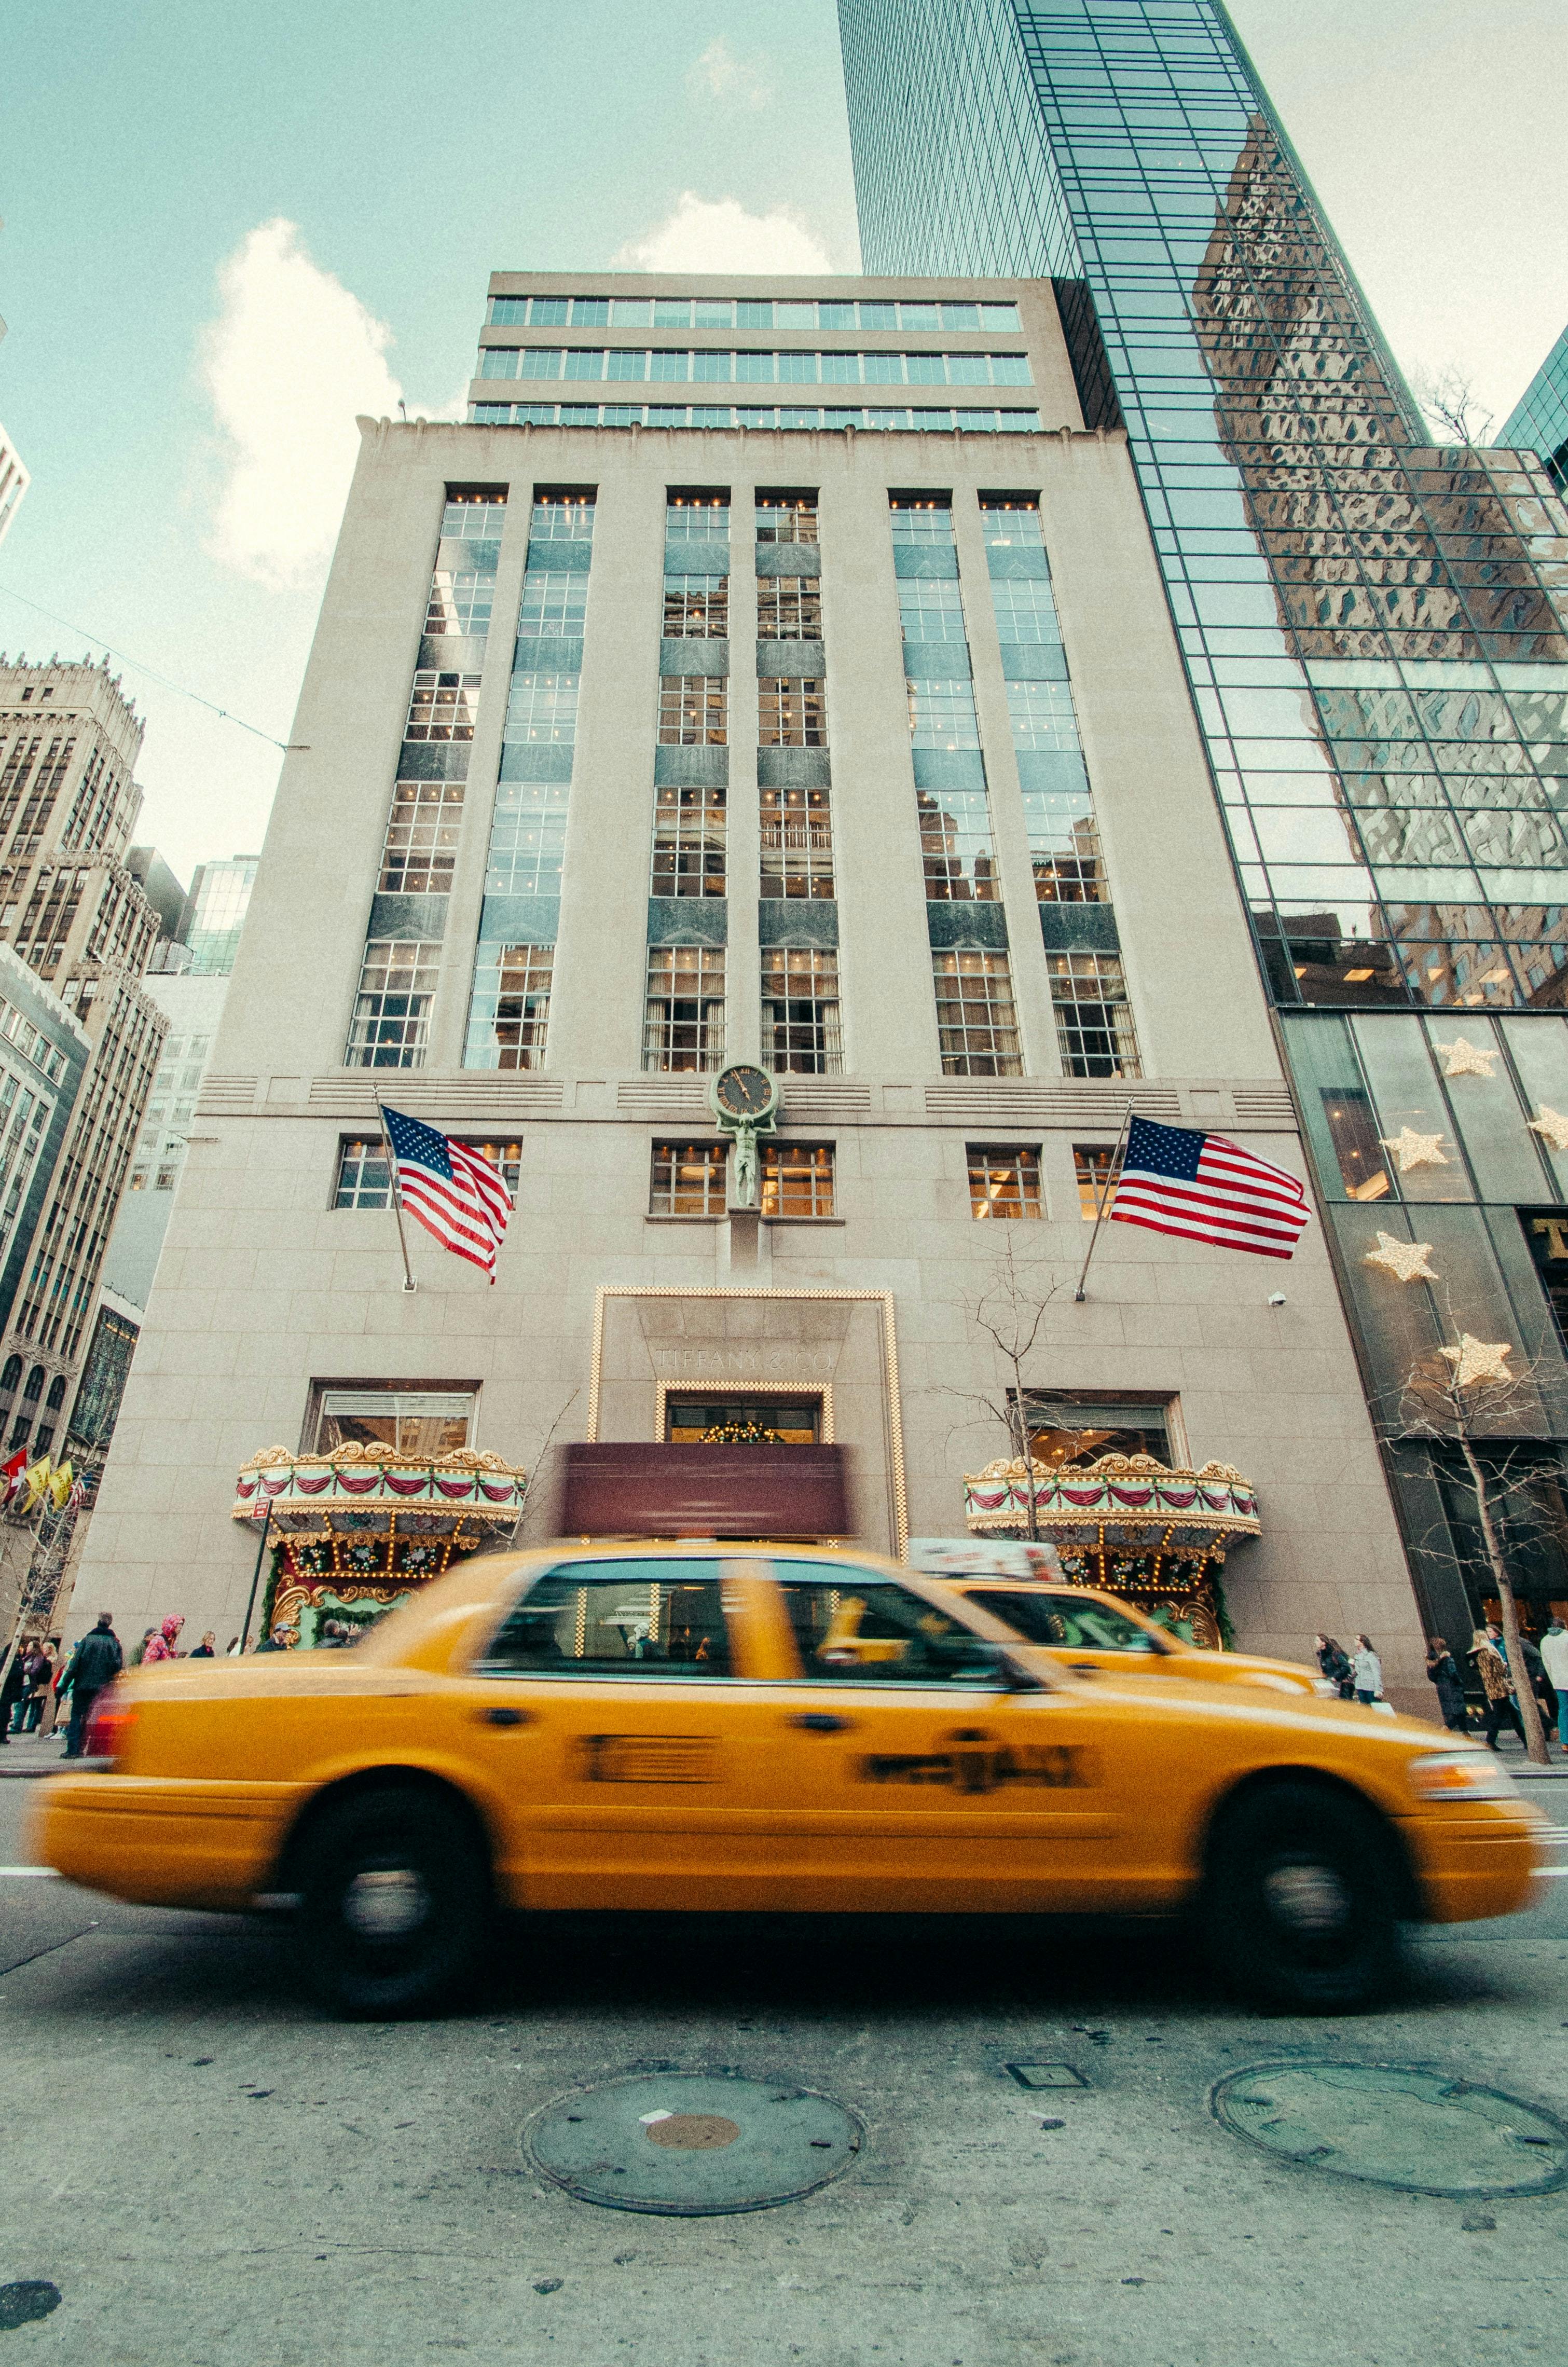 Tiffany HQ and Store on 5th Avenue in New York City Photo: Benjamin Jopen on Unsplash